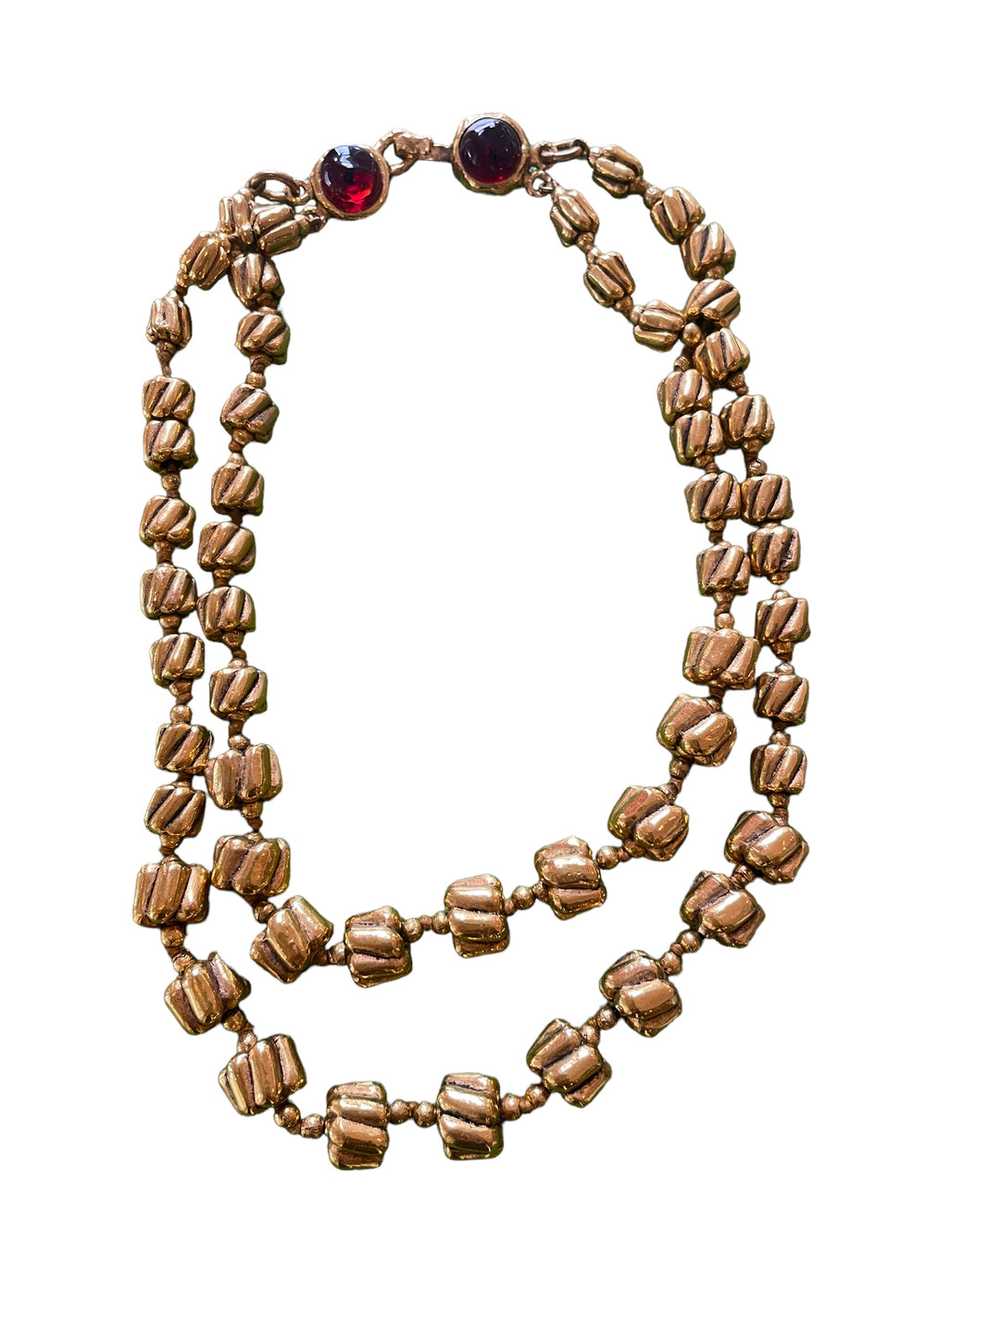 Chanel Two Strand Necklace - image 1